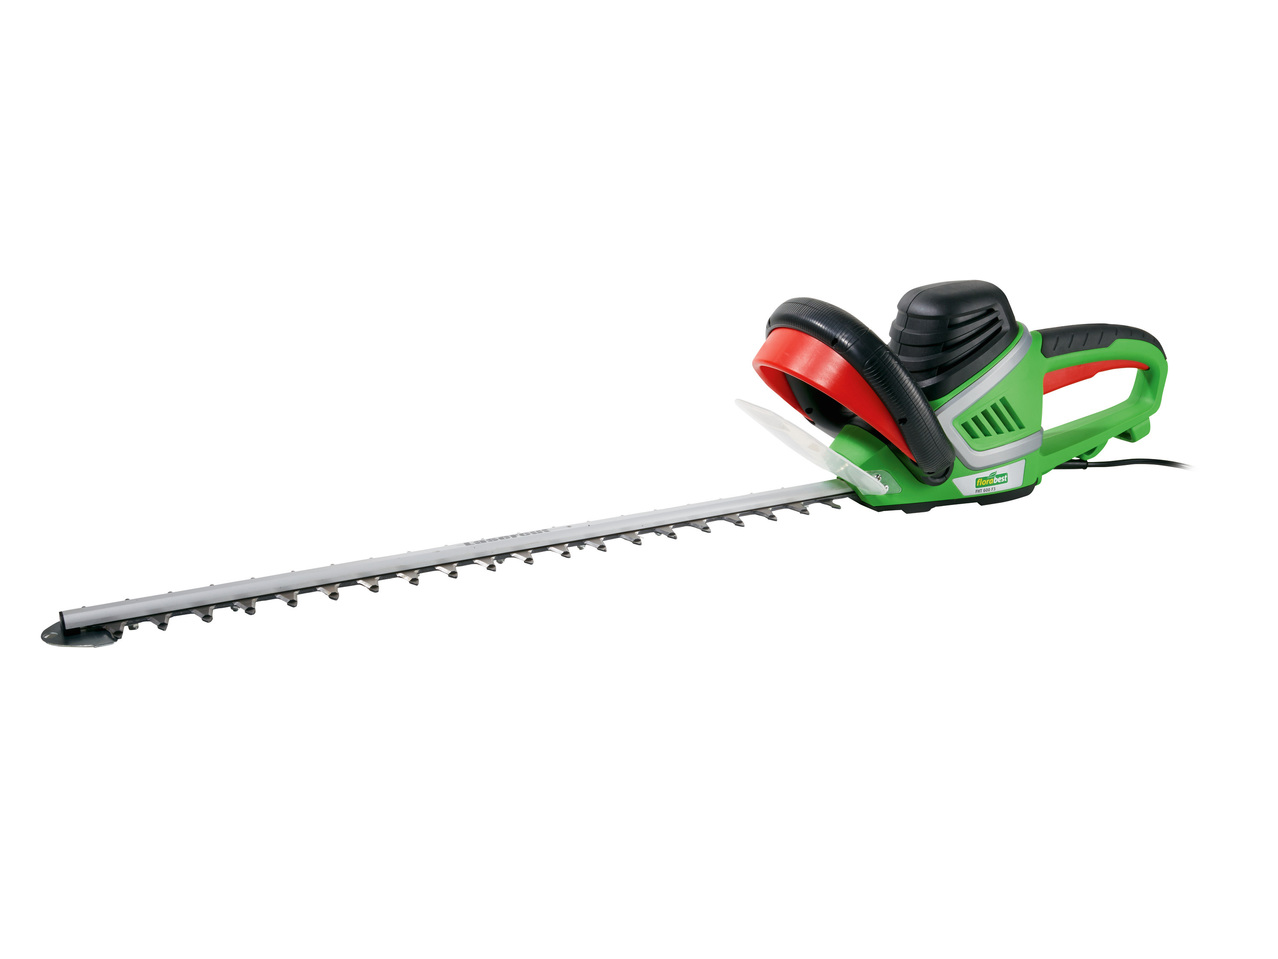 FLORABEST 600W Electric Hedge Trimmer